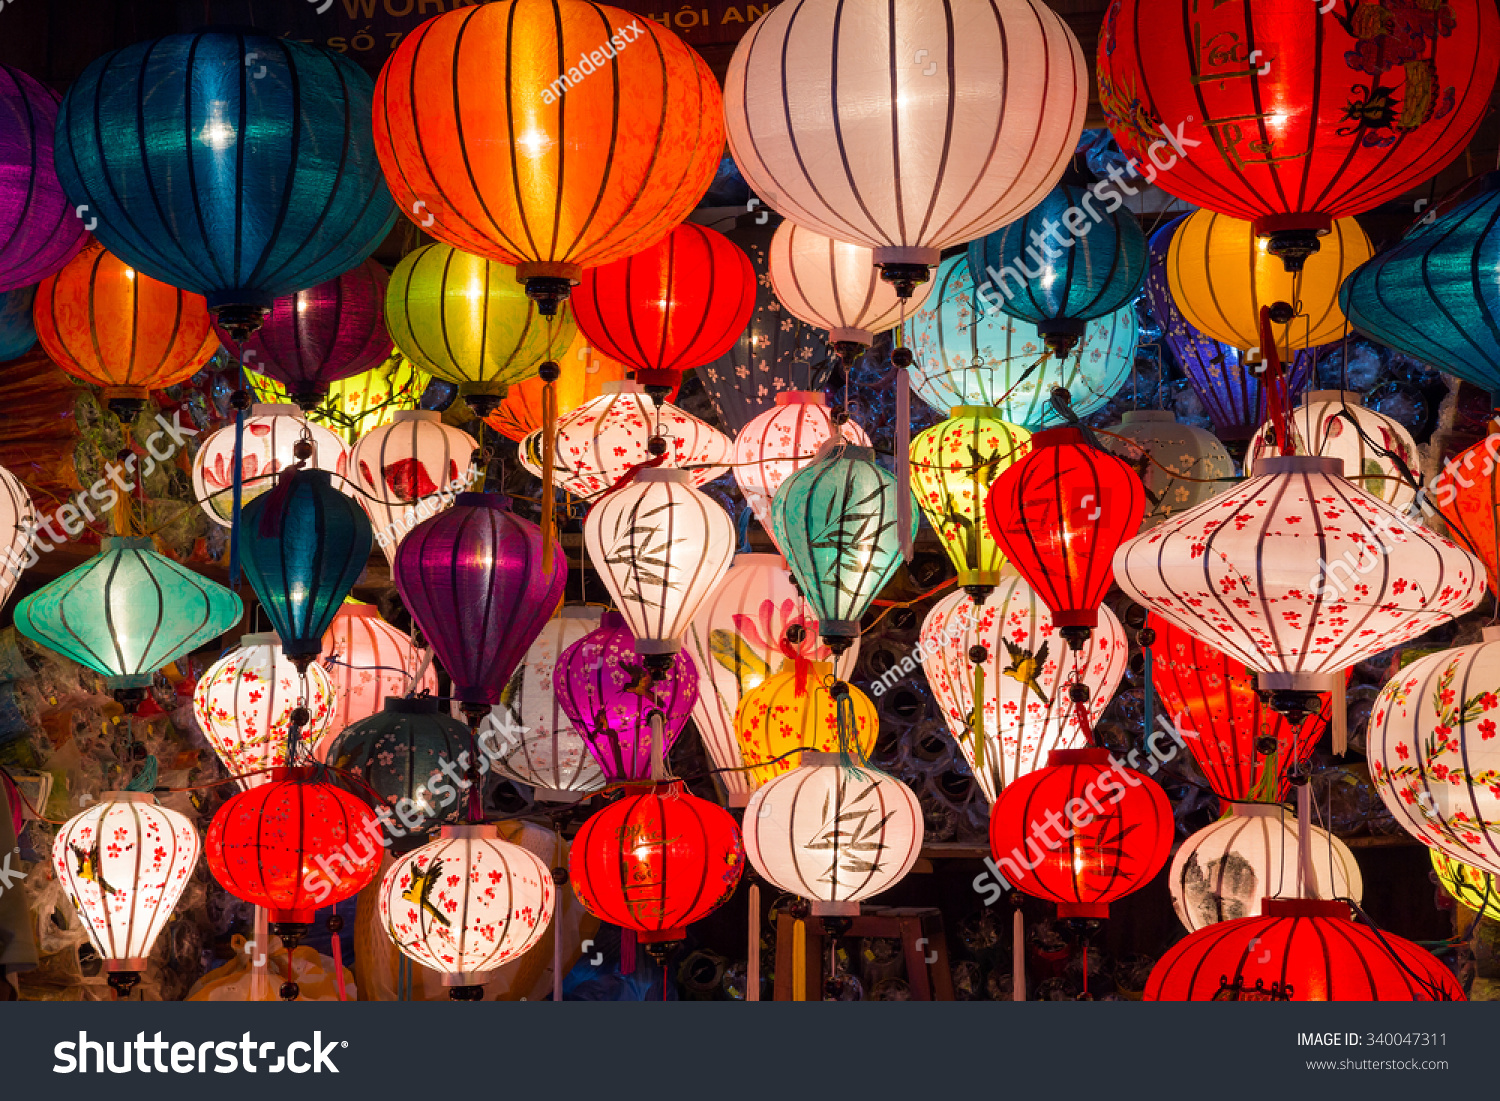 Paper lanterns on the streets of old Asian town #340047311